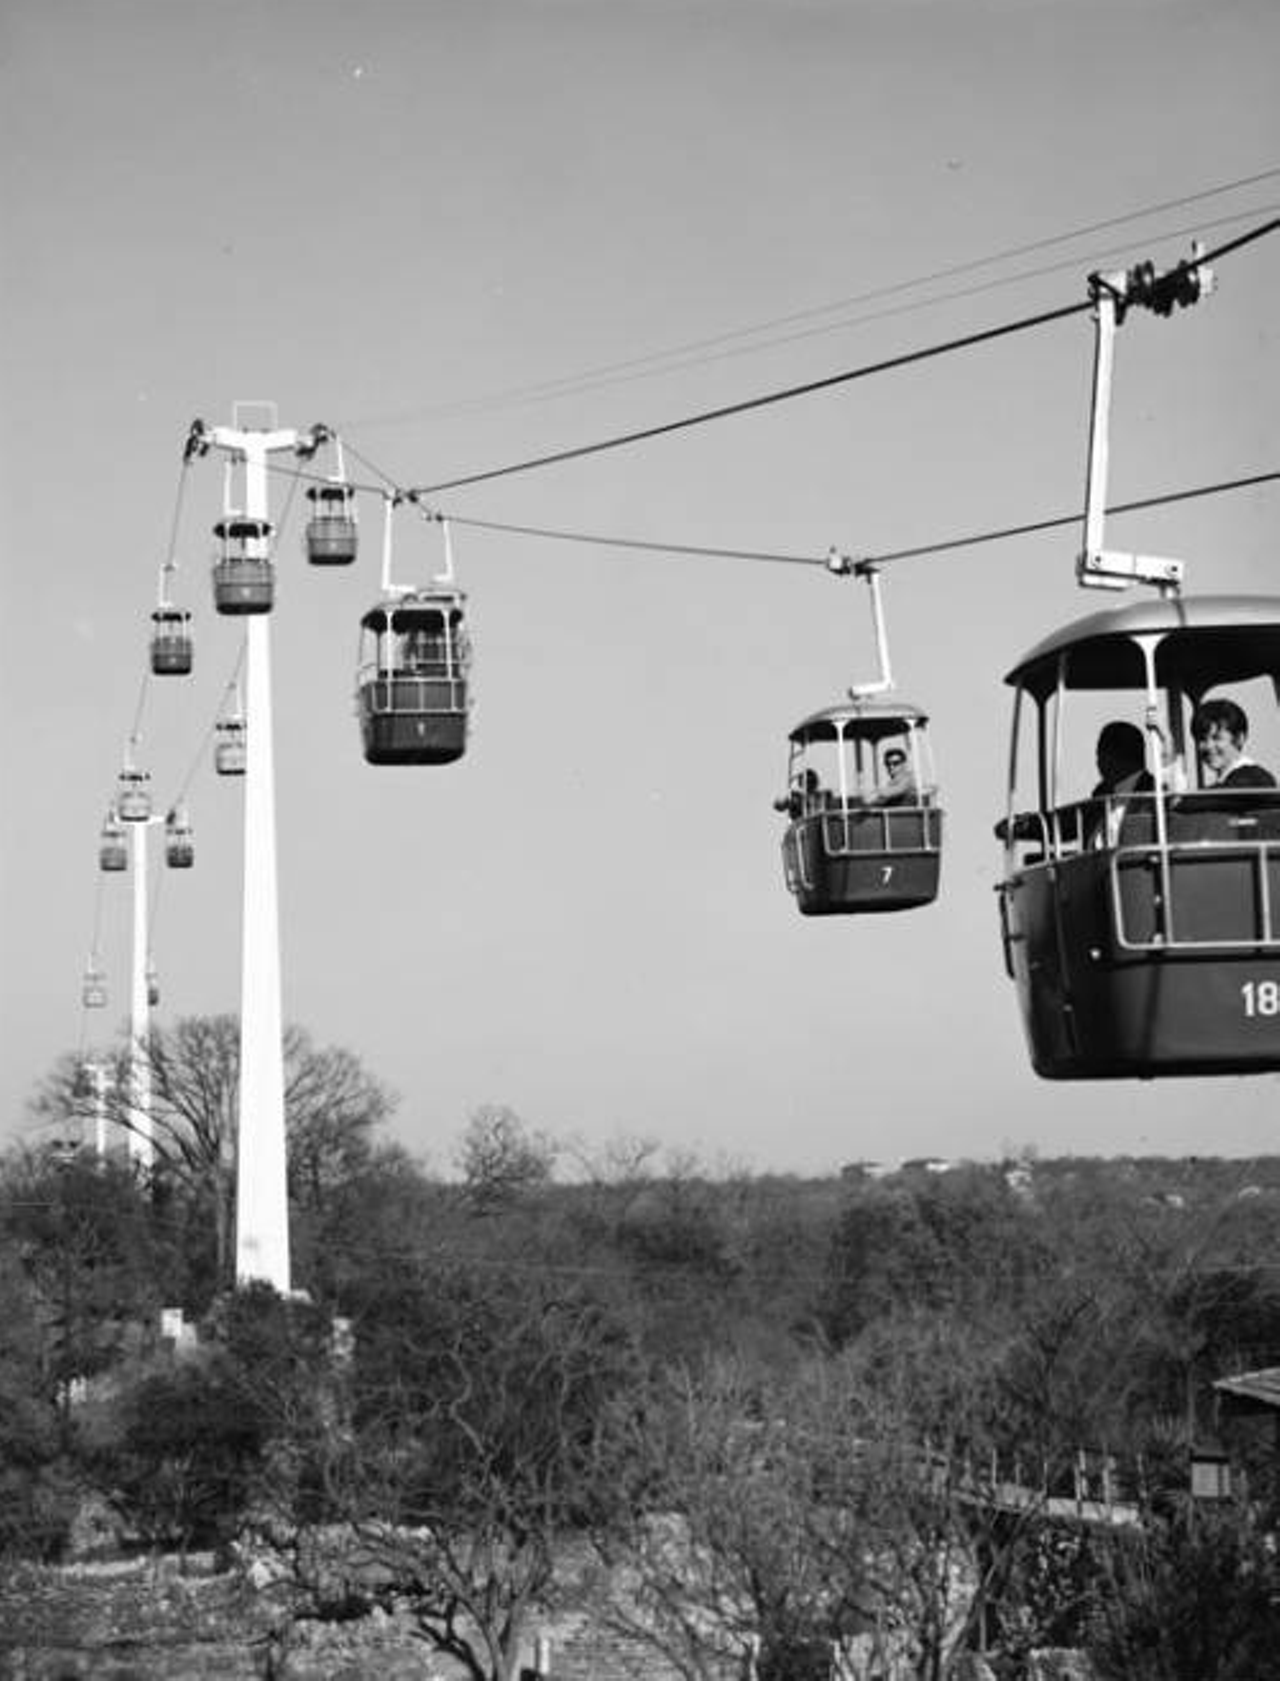 The Sky Ride at Brackenridge Park
For 35 years, the Sky Ride offered San Antonians and tourists amazing views of the city skyline and a magical view of Brackenridge Park below. However, over time, the colorful four-foot wide gondolas deteriorated, and in 1999, city council opted not to spend the millions of dollars required on upgrades. For those old enough to remember, a visit to Brackenridge or the nearby San Antonio Zoo was never quite the same after the ride's closure.
Photo via UTSA Libraries Digital Collections